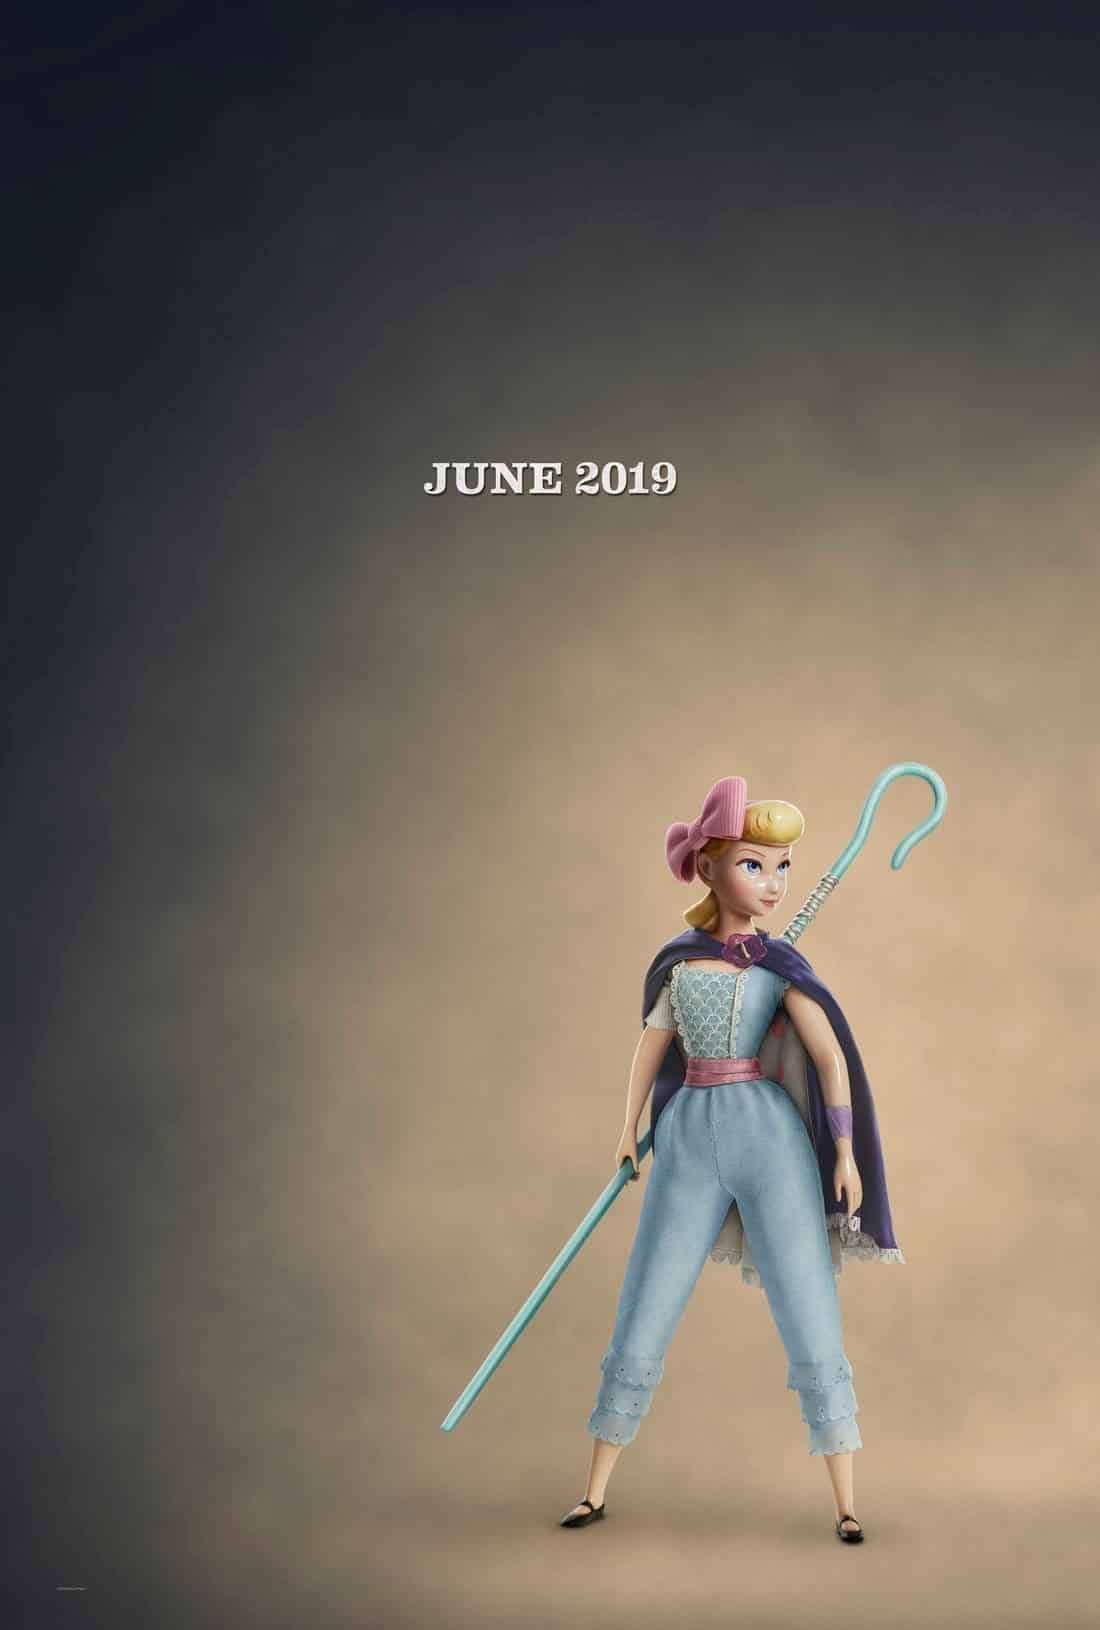 New Toy Story 4 Clip Shows Bo Peep Helping Stage a Rescue